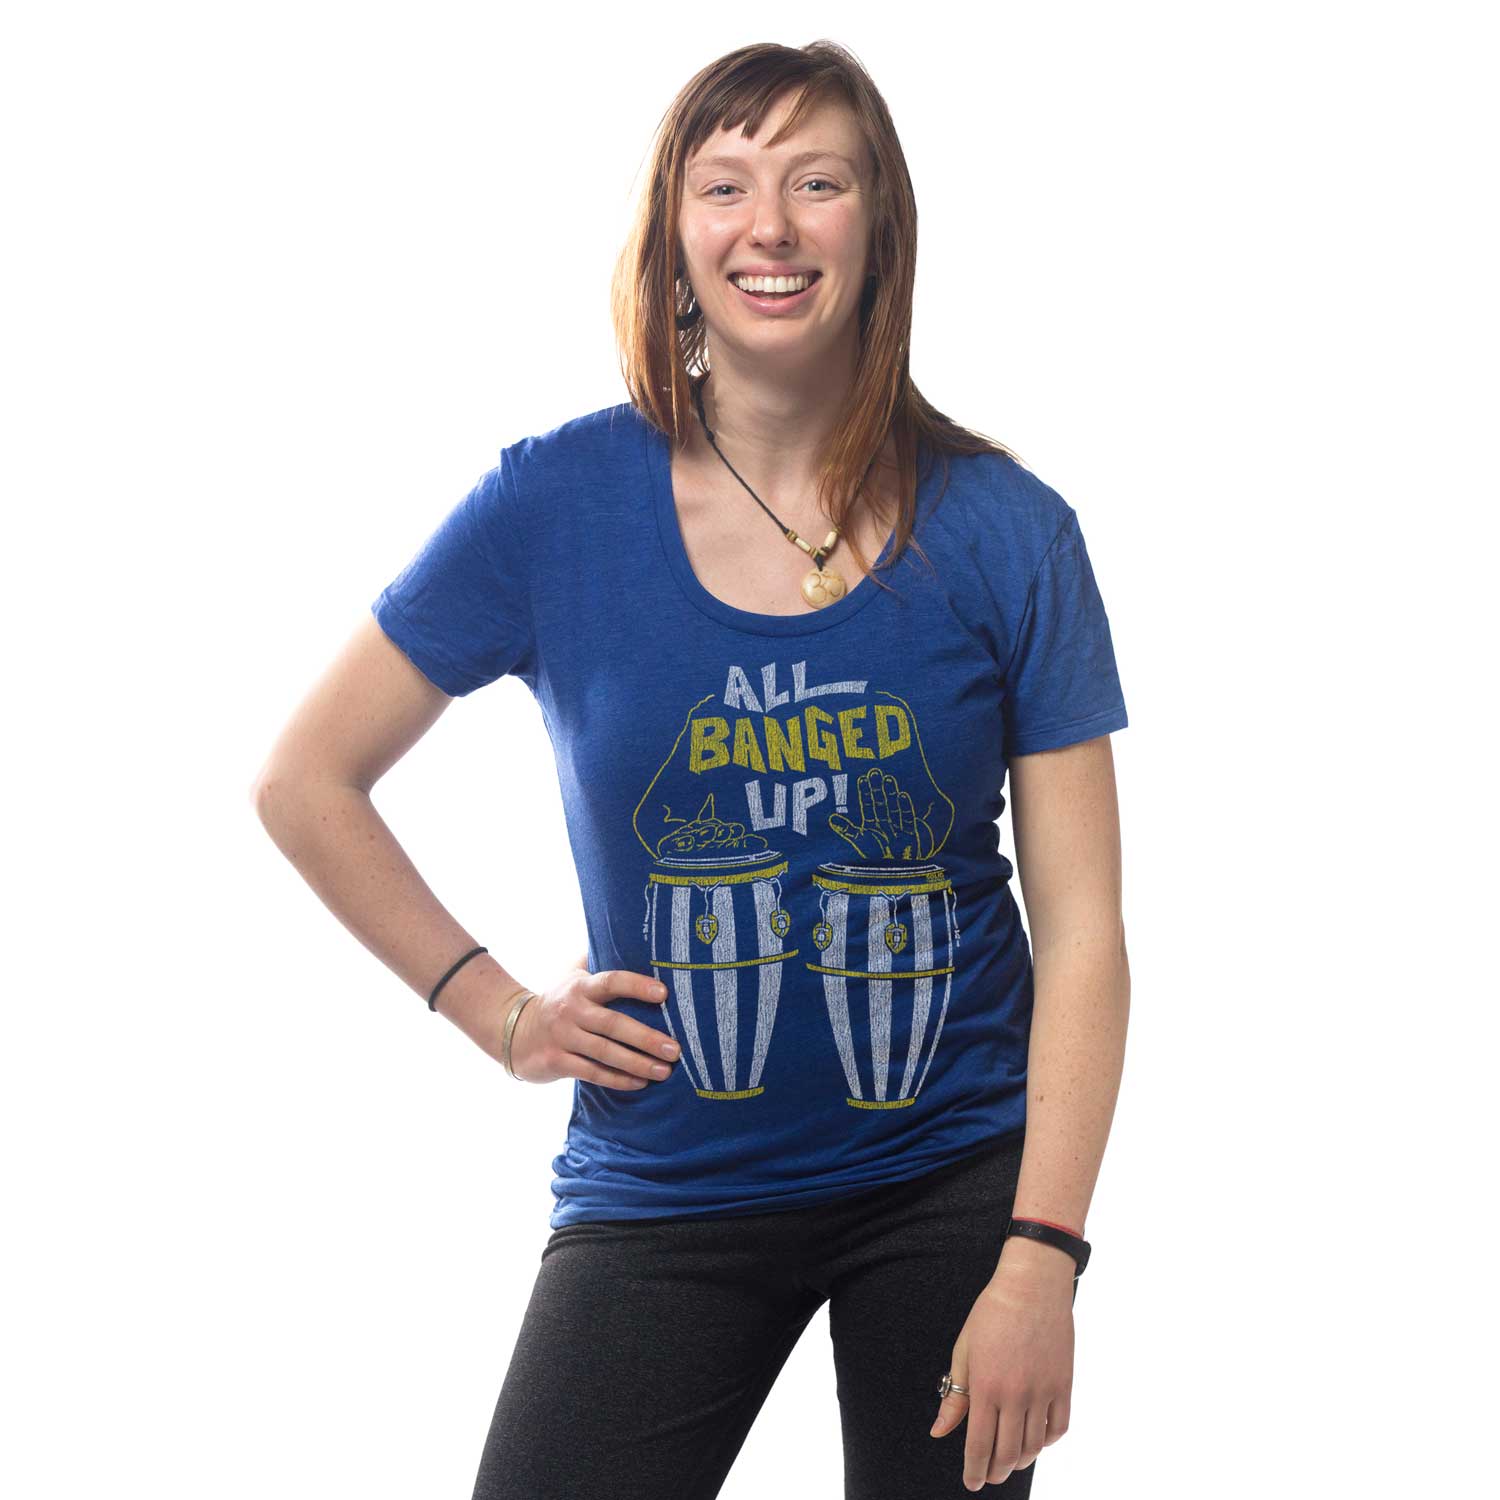 Women's All Banged Up Vintage Graphic T-Shirt | Funny NOLA Music Blue Tee on Model | Solid Threads